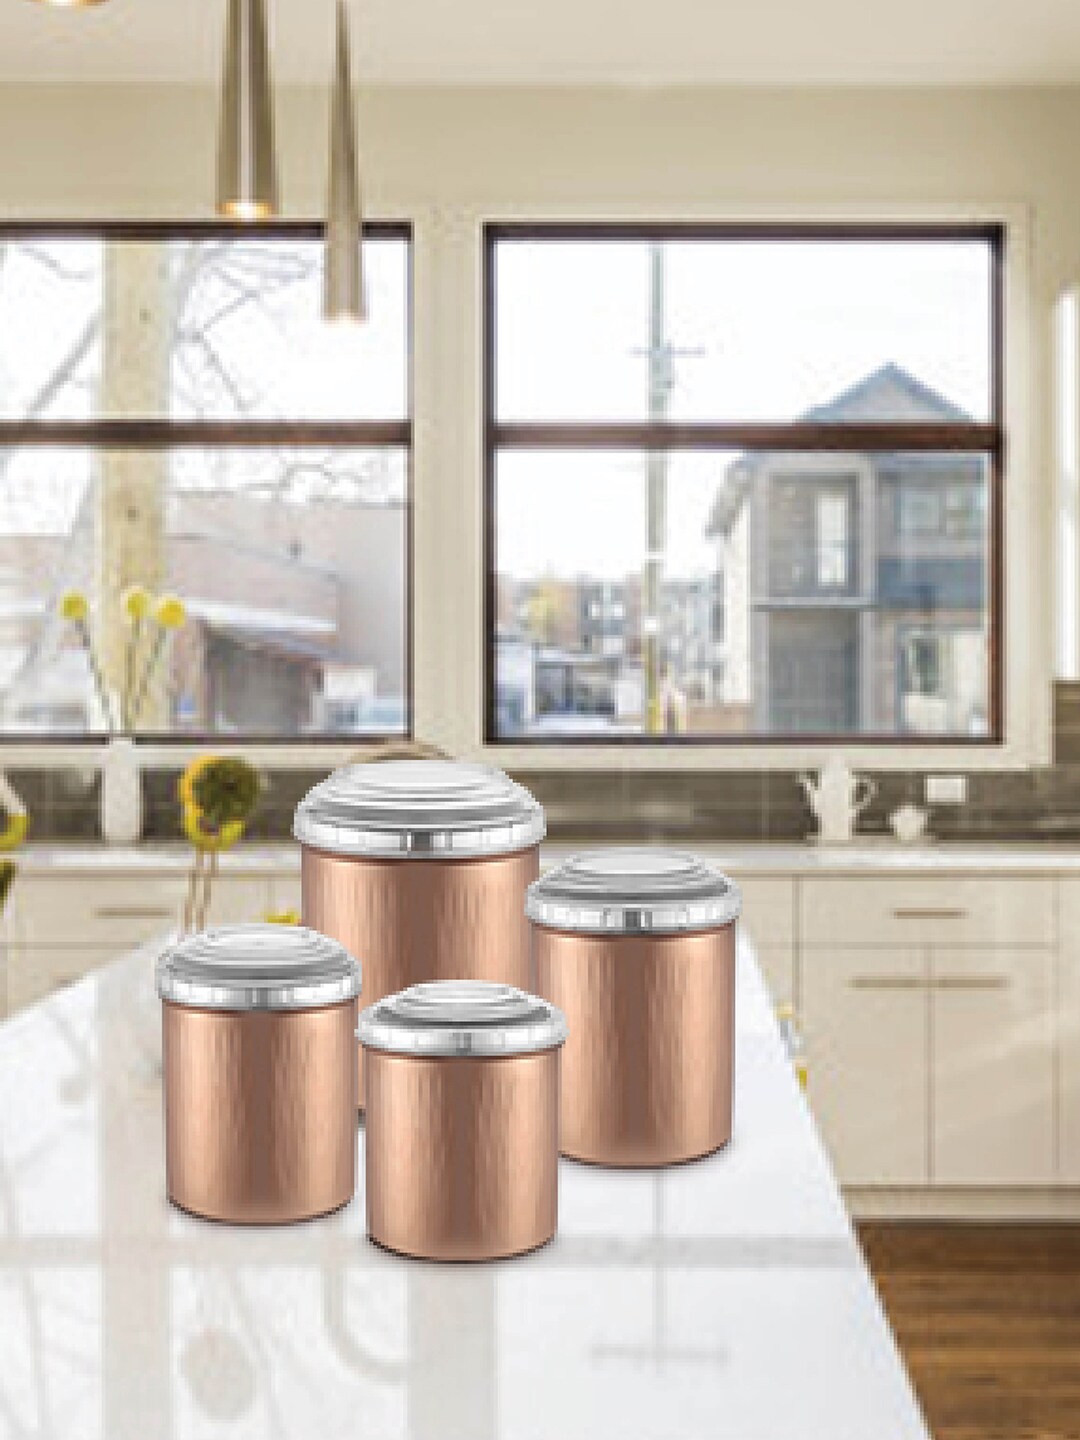 Jensons Set of 4 Copper-Toned Solid Stainless Steel Canisters With Lid